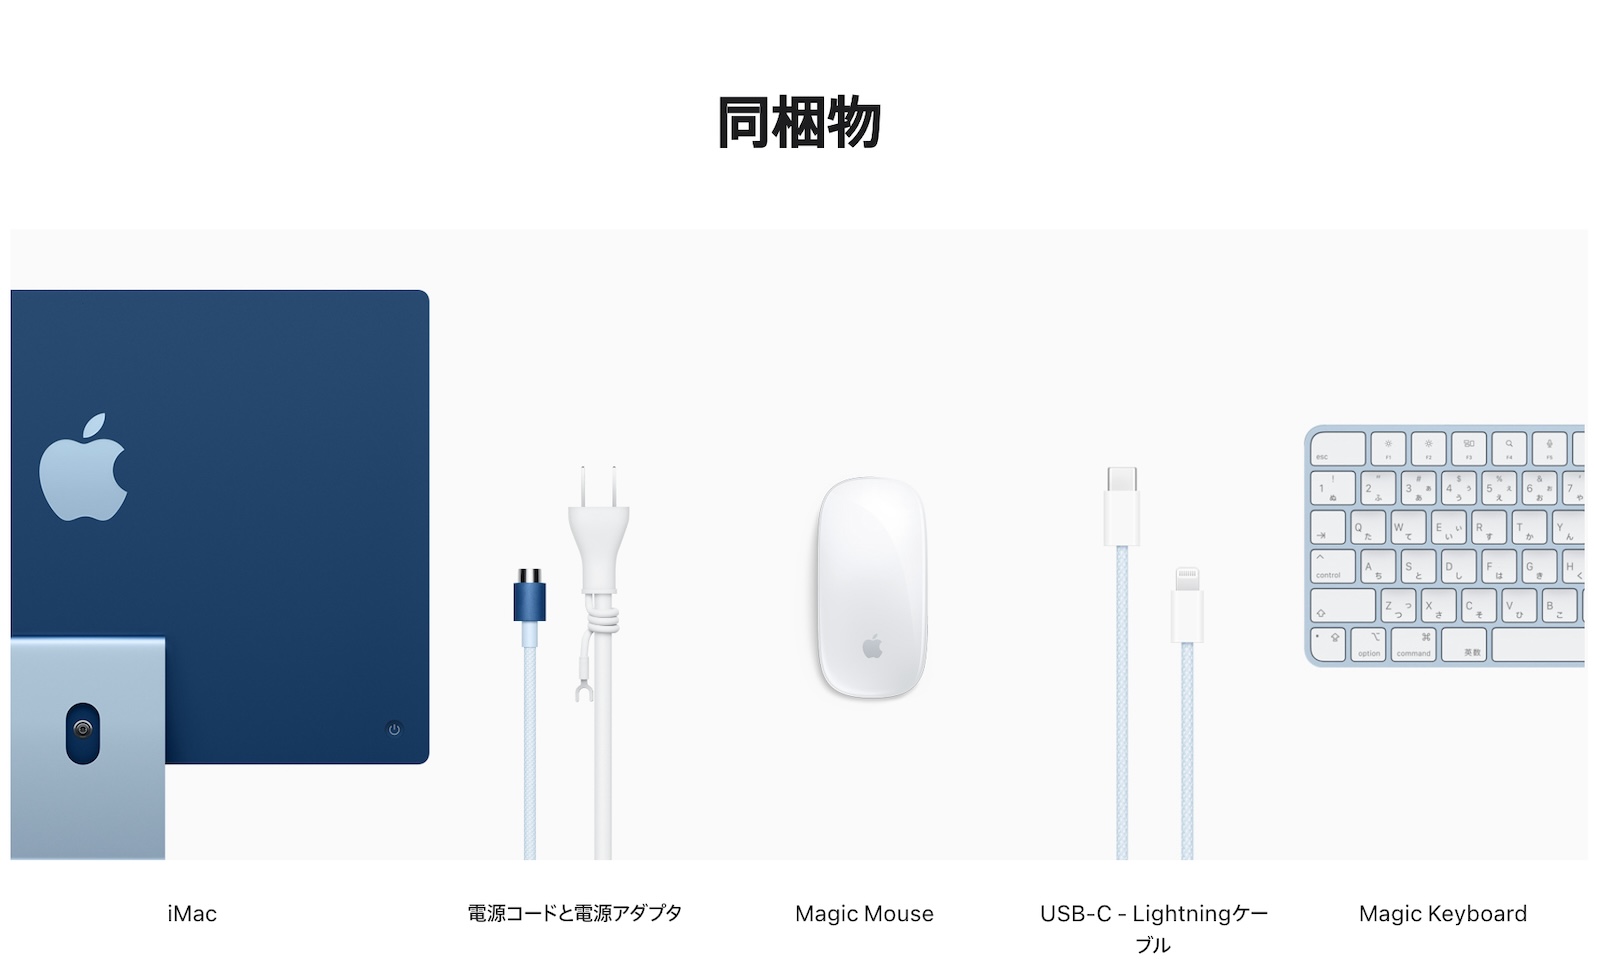 Imac still comes with lightning accessories